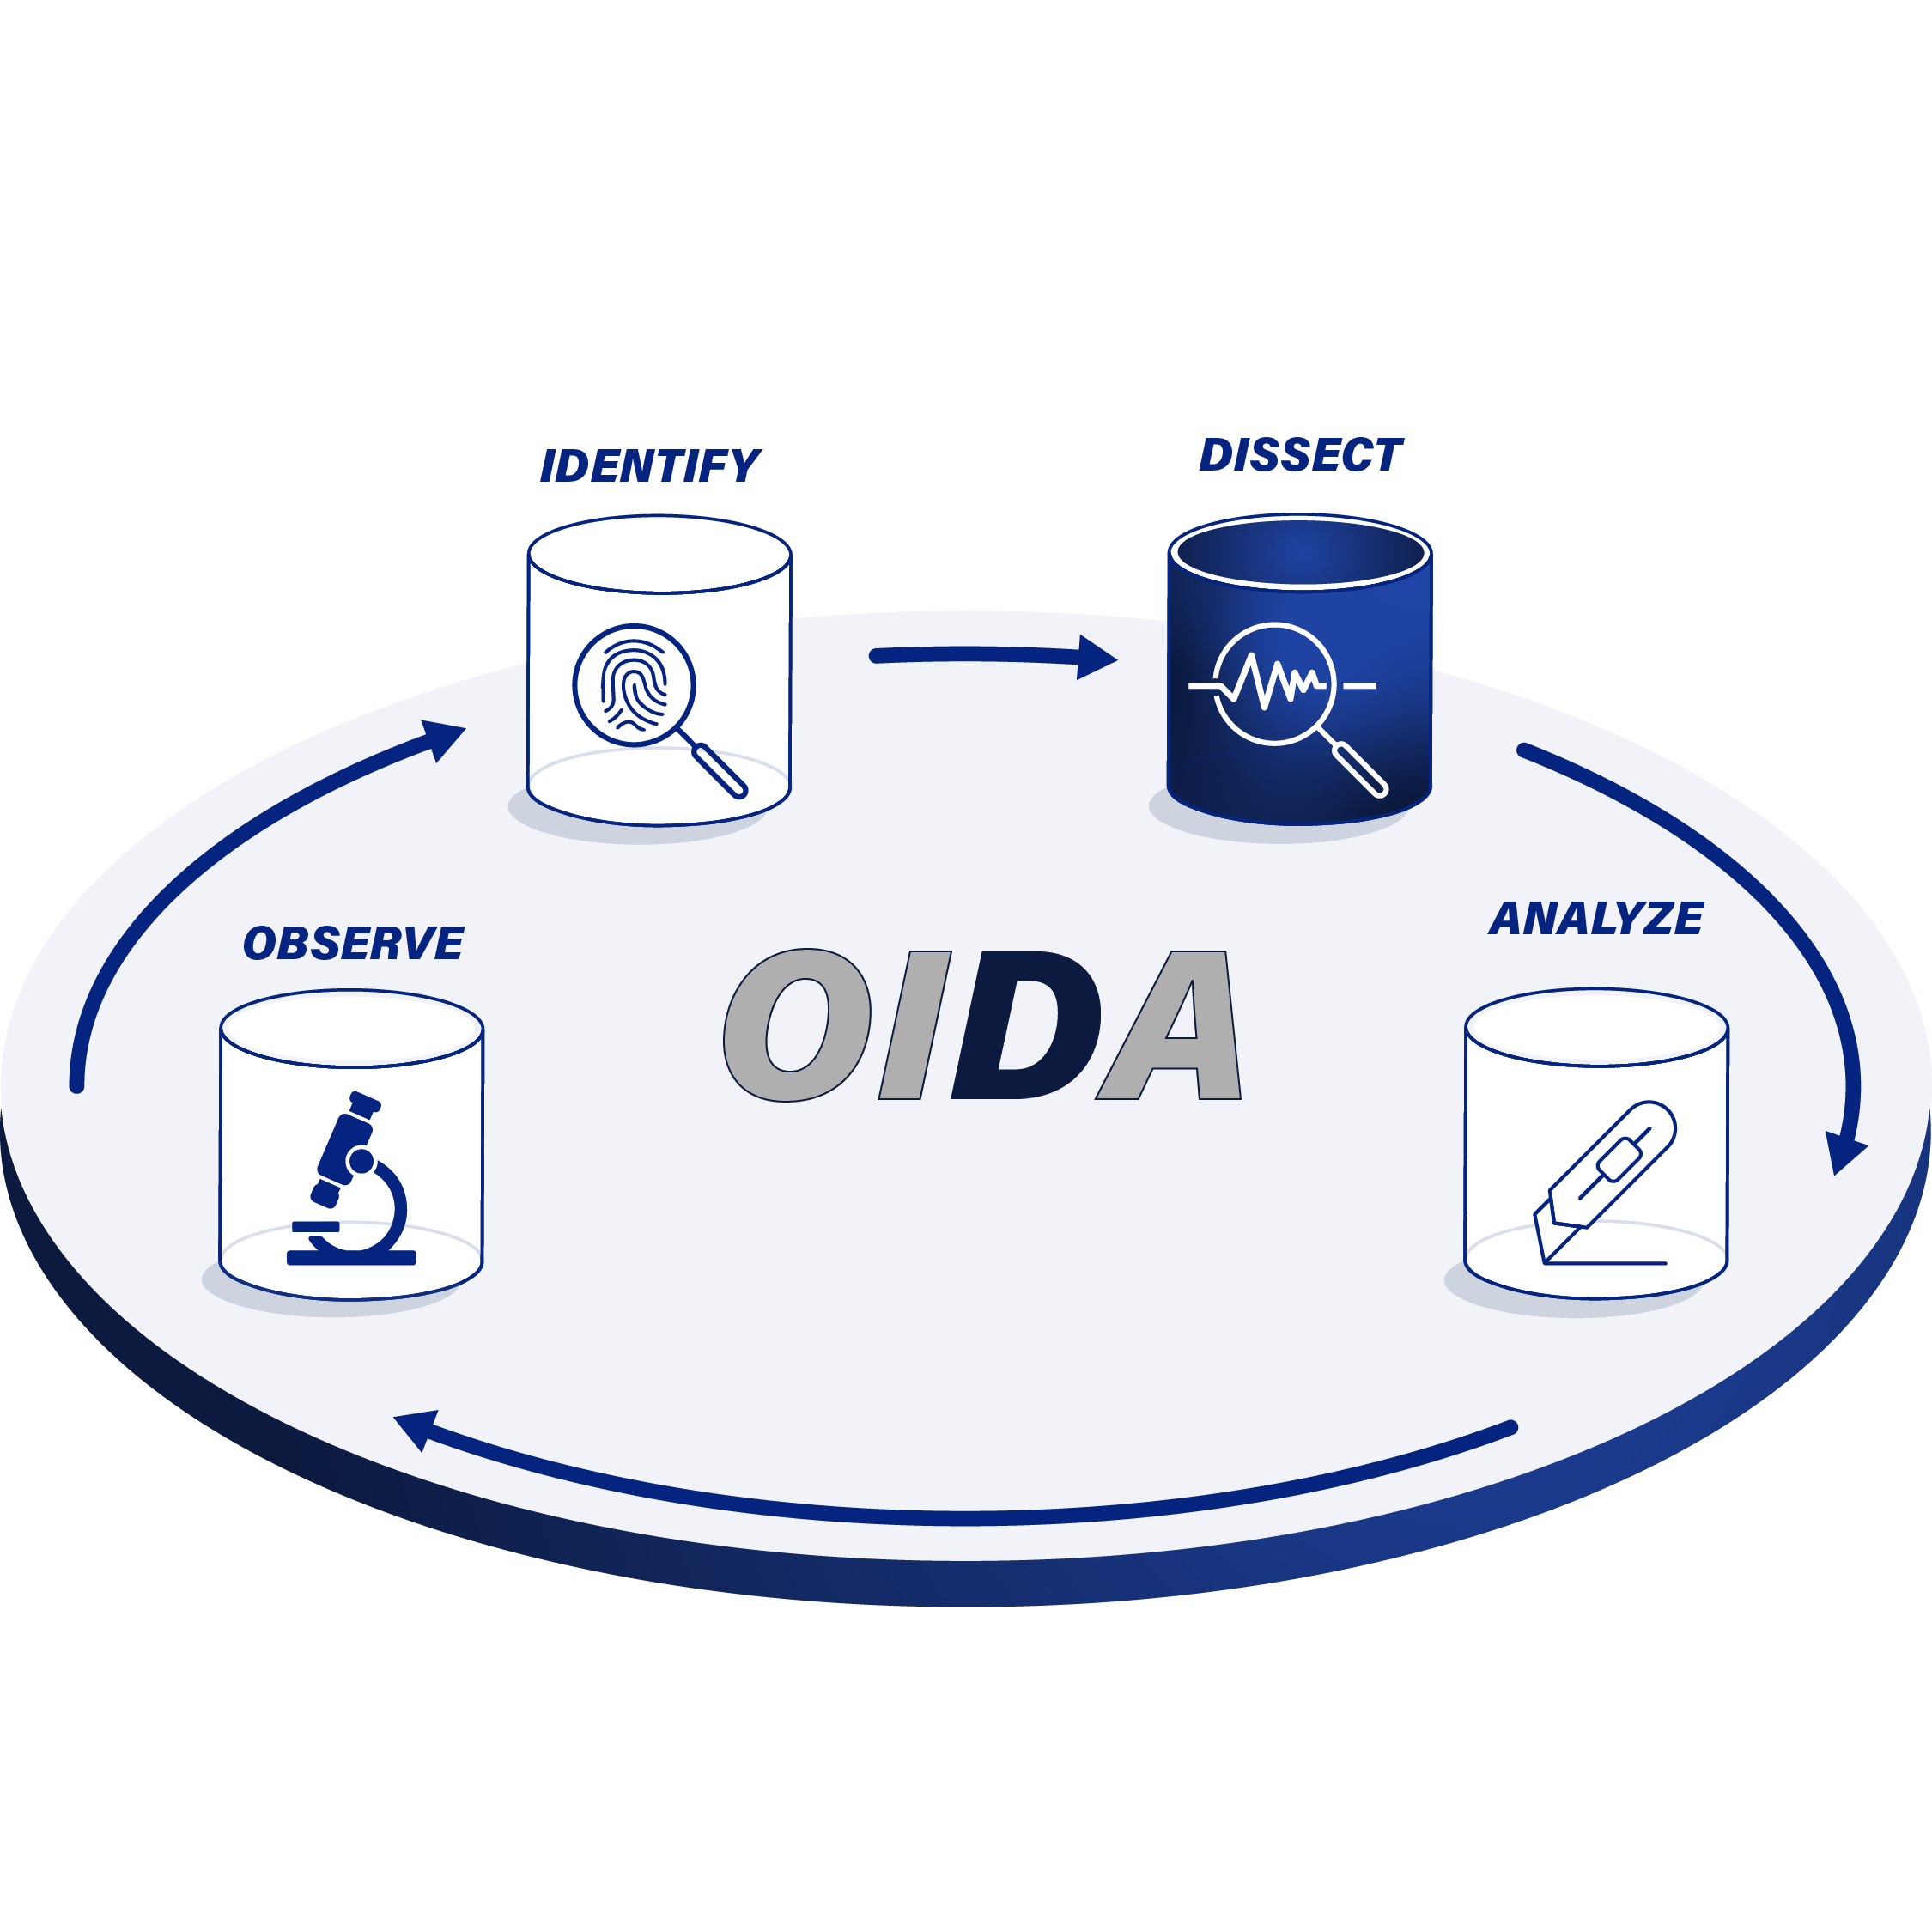 OIDA: Mastering Packet Analysis - The Art of Dissection